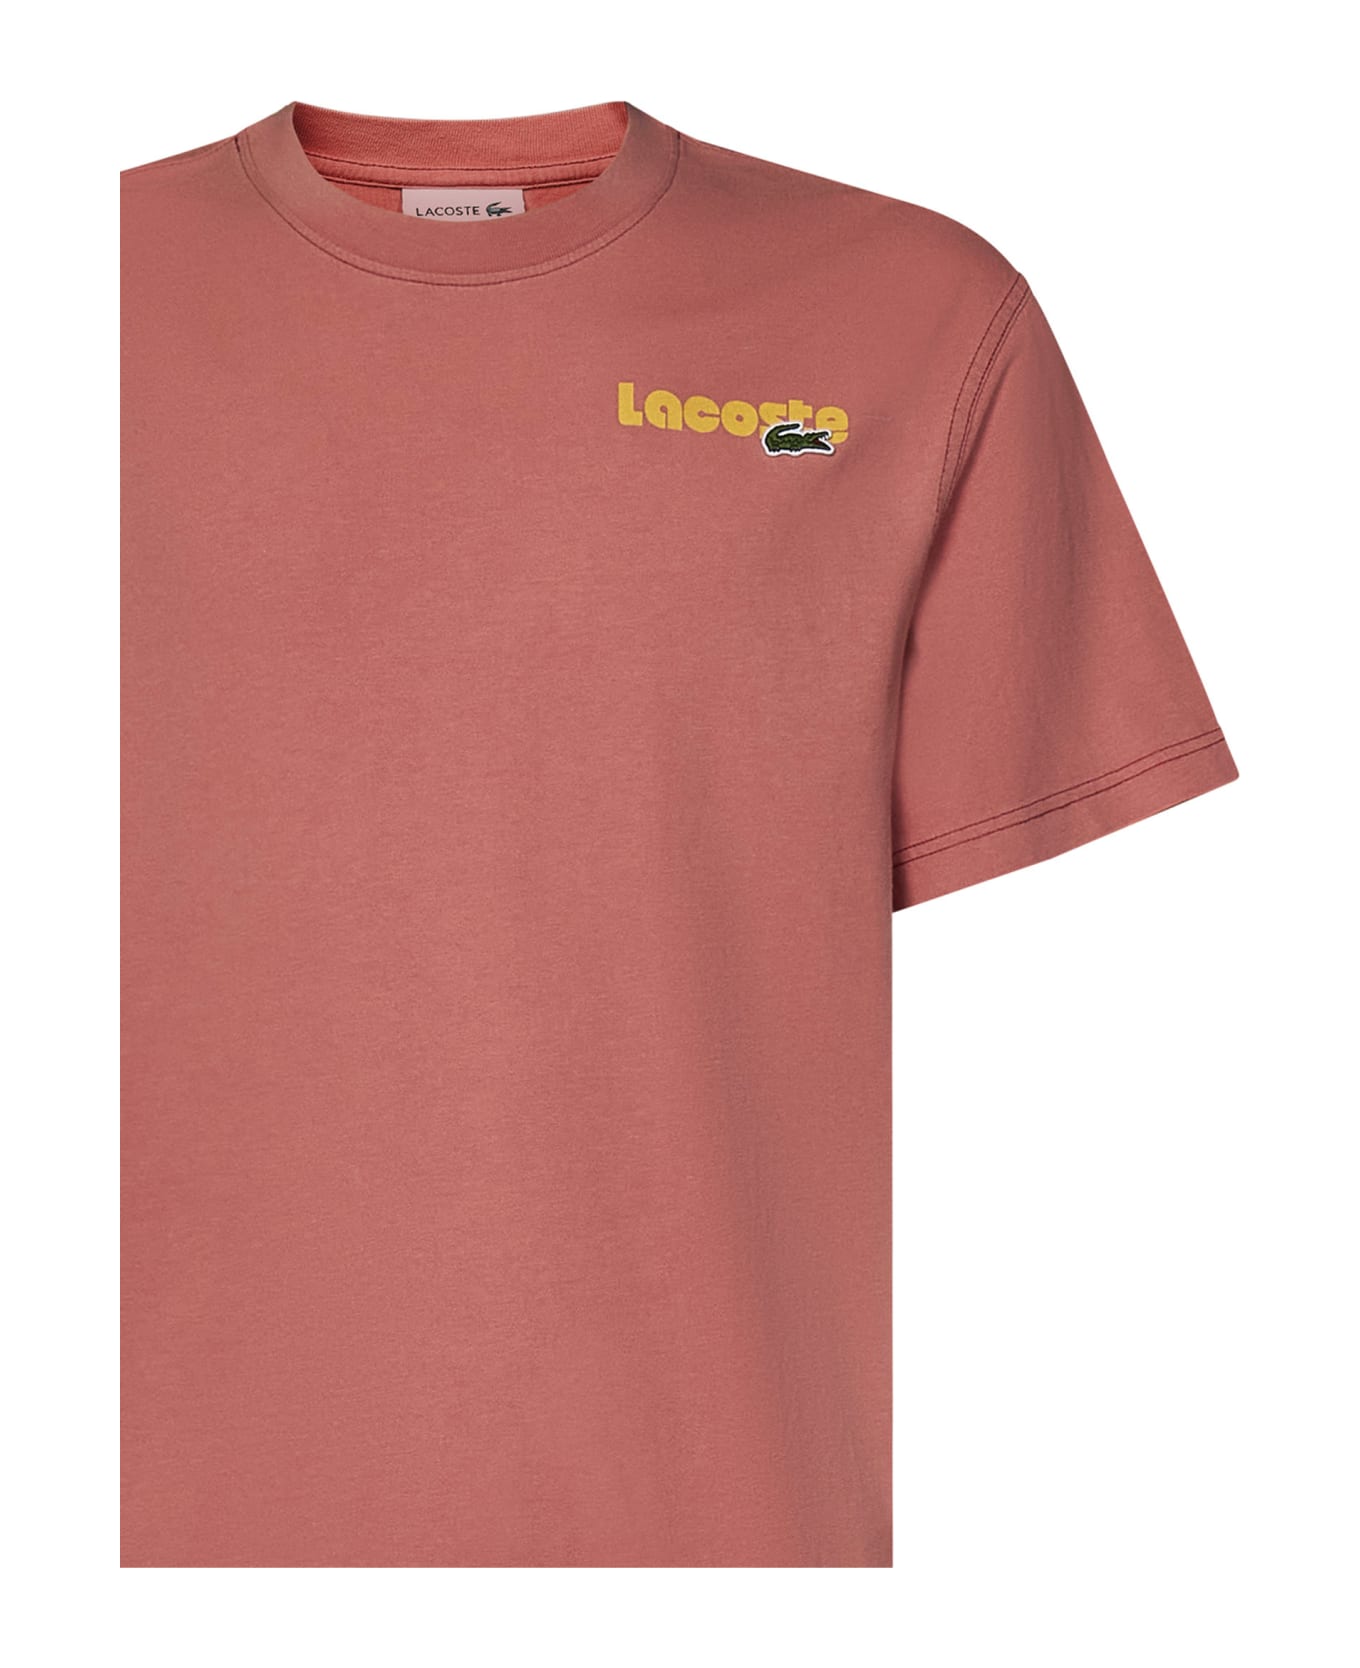 Lacoste T-shirt - Pink